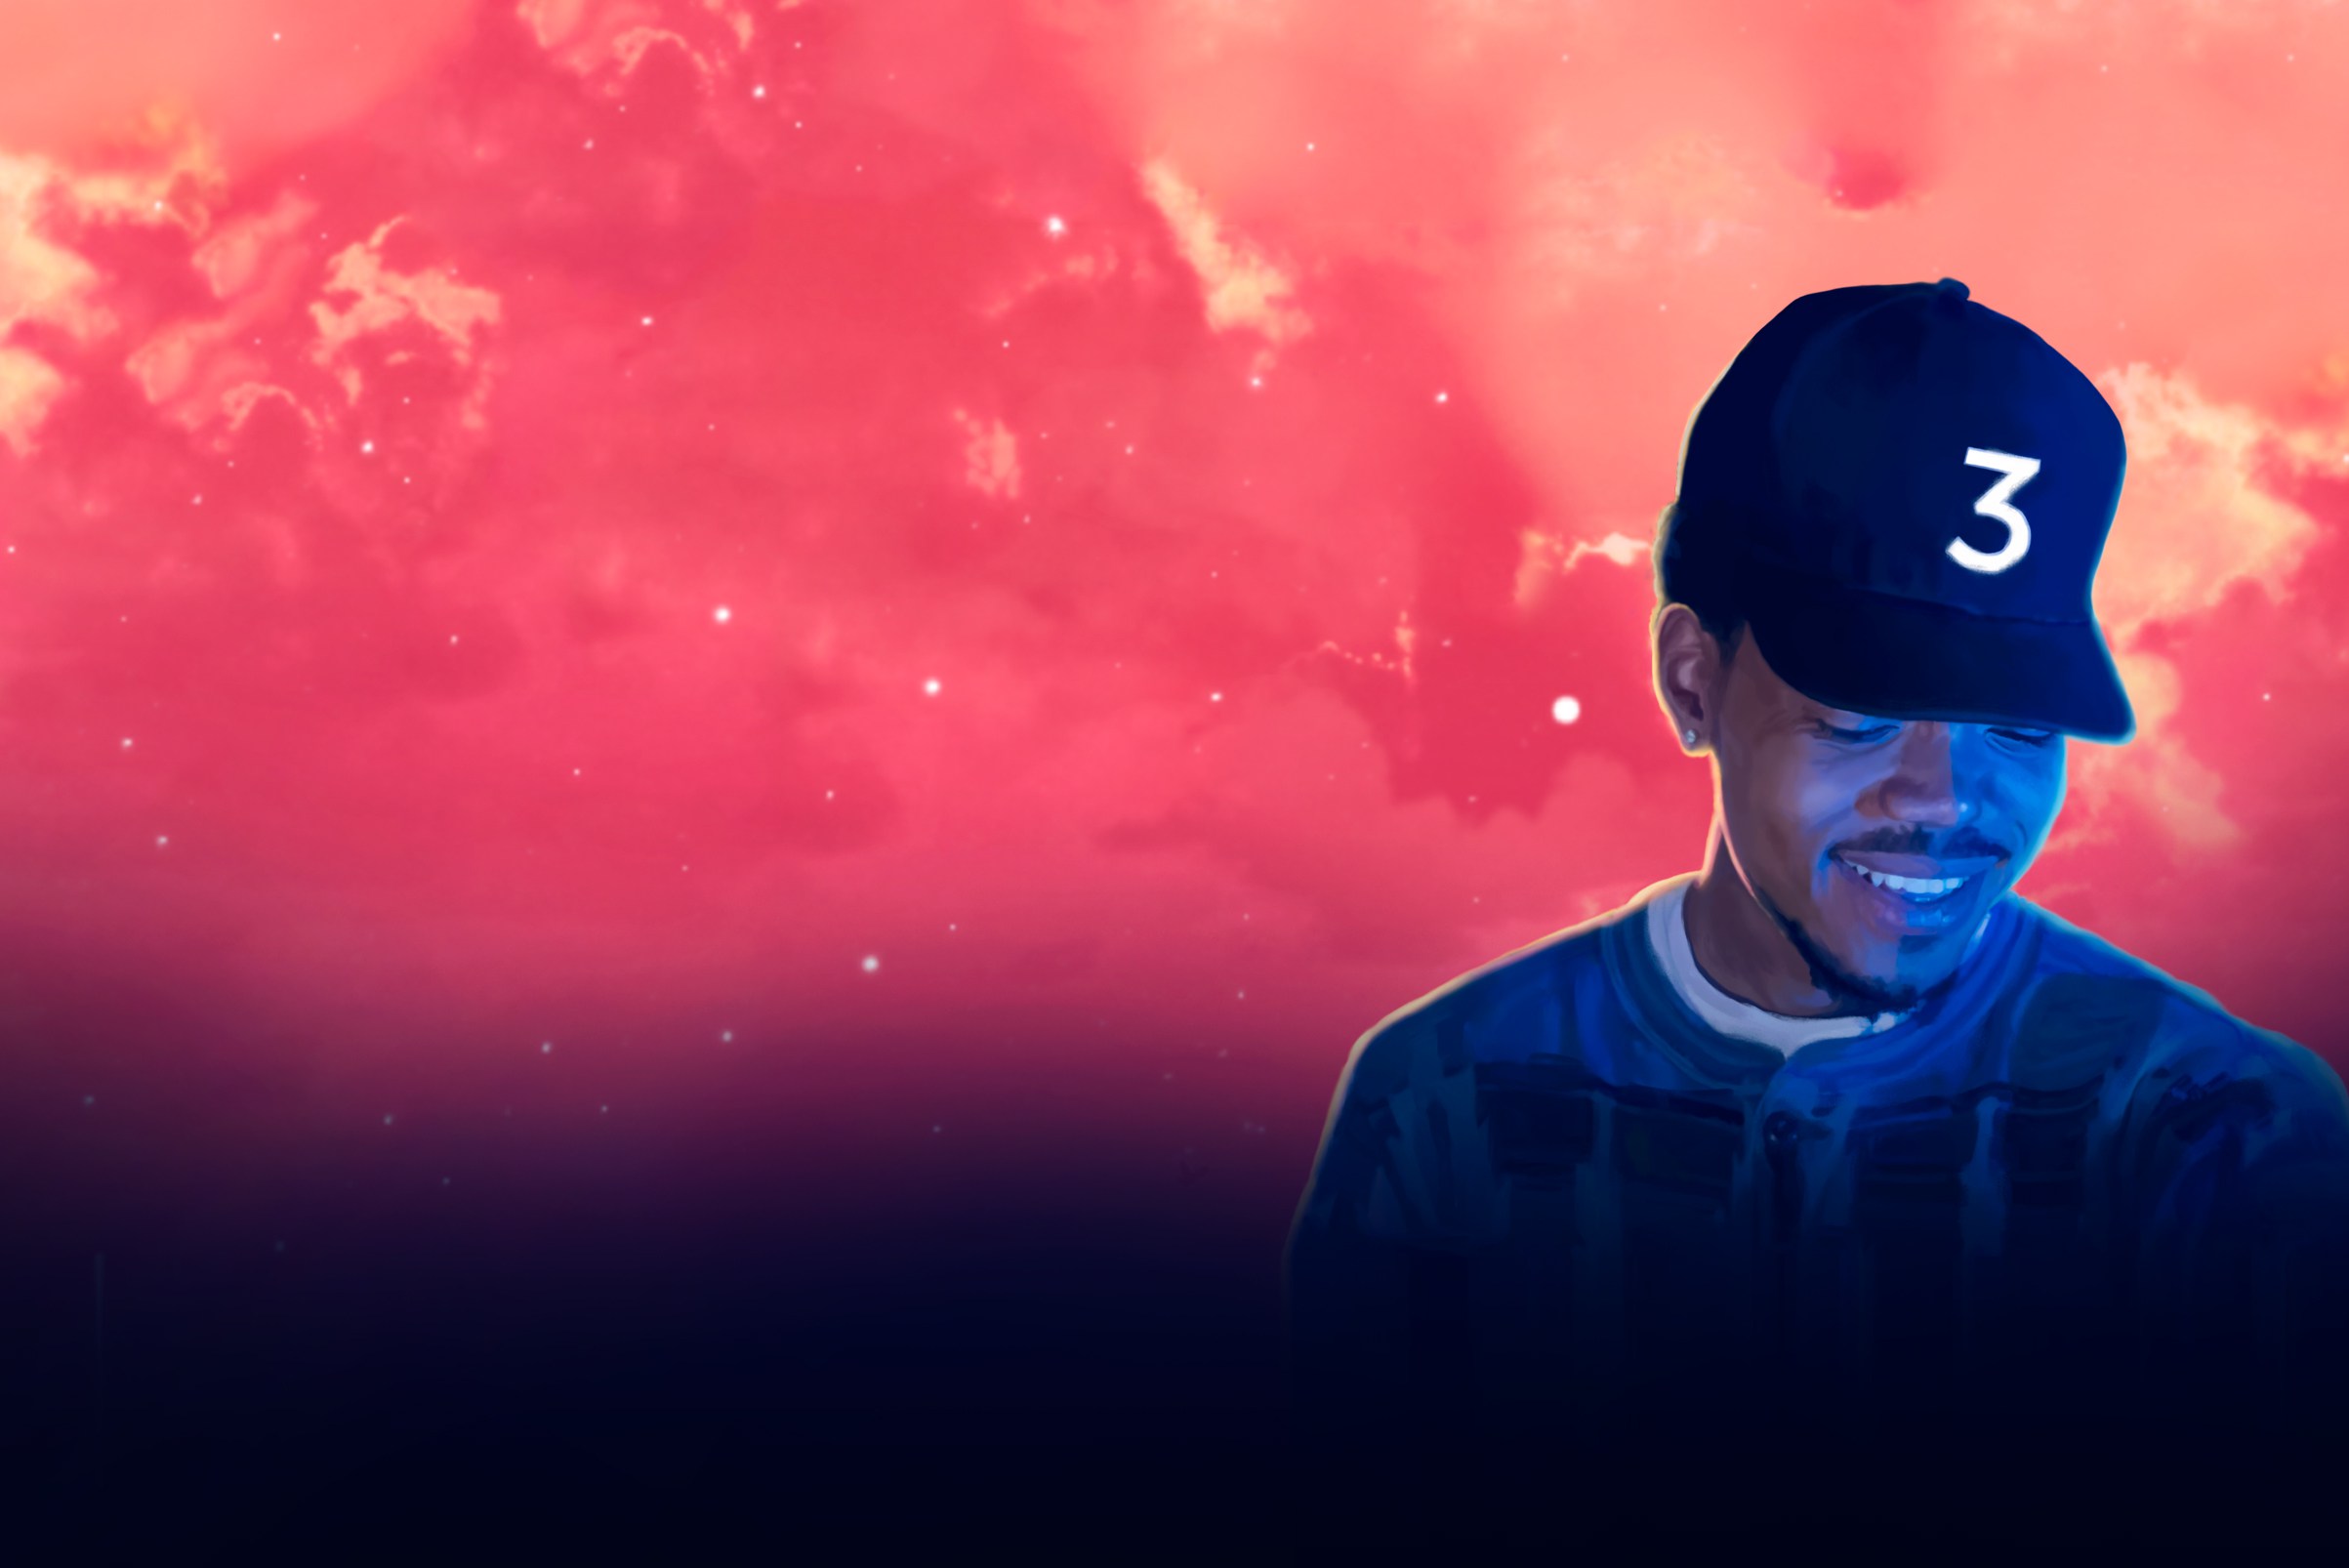 Chance The Rapper – “Coloring Book” Review